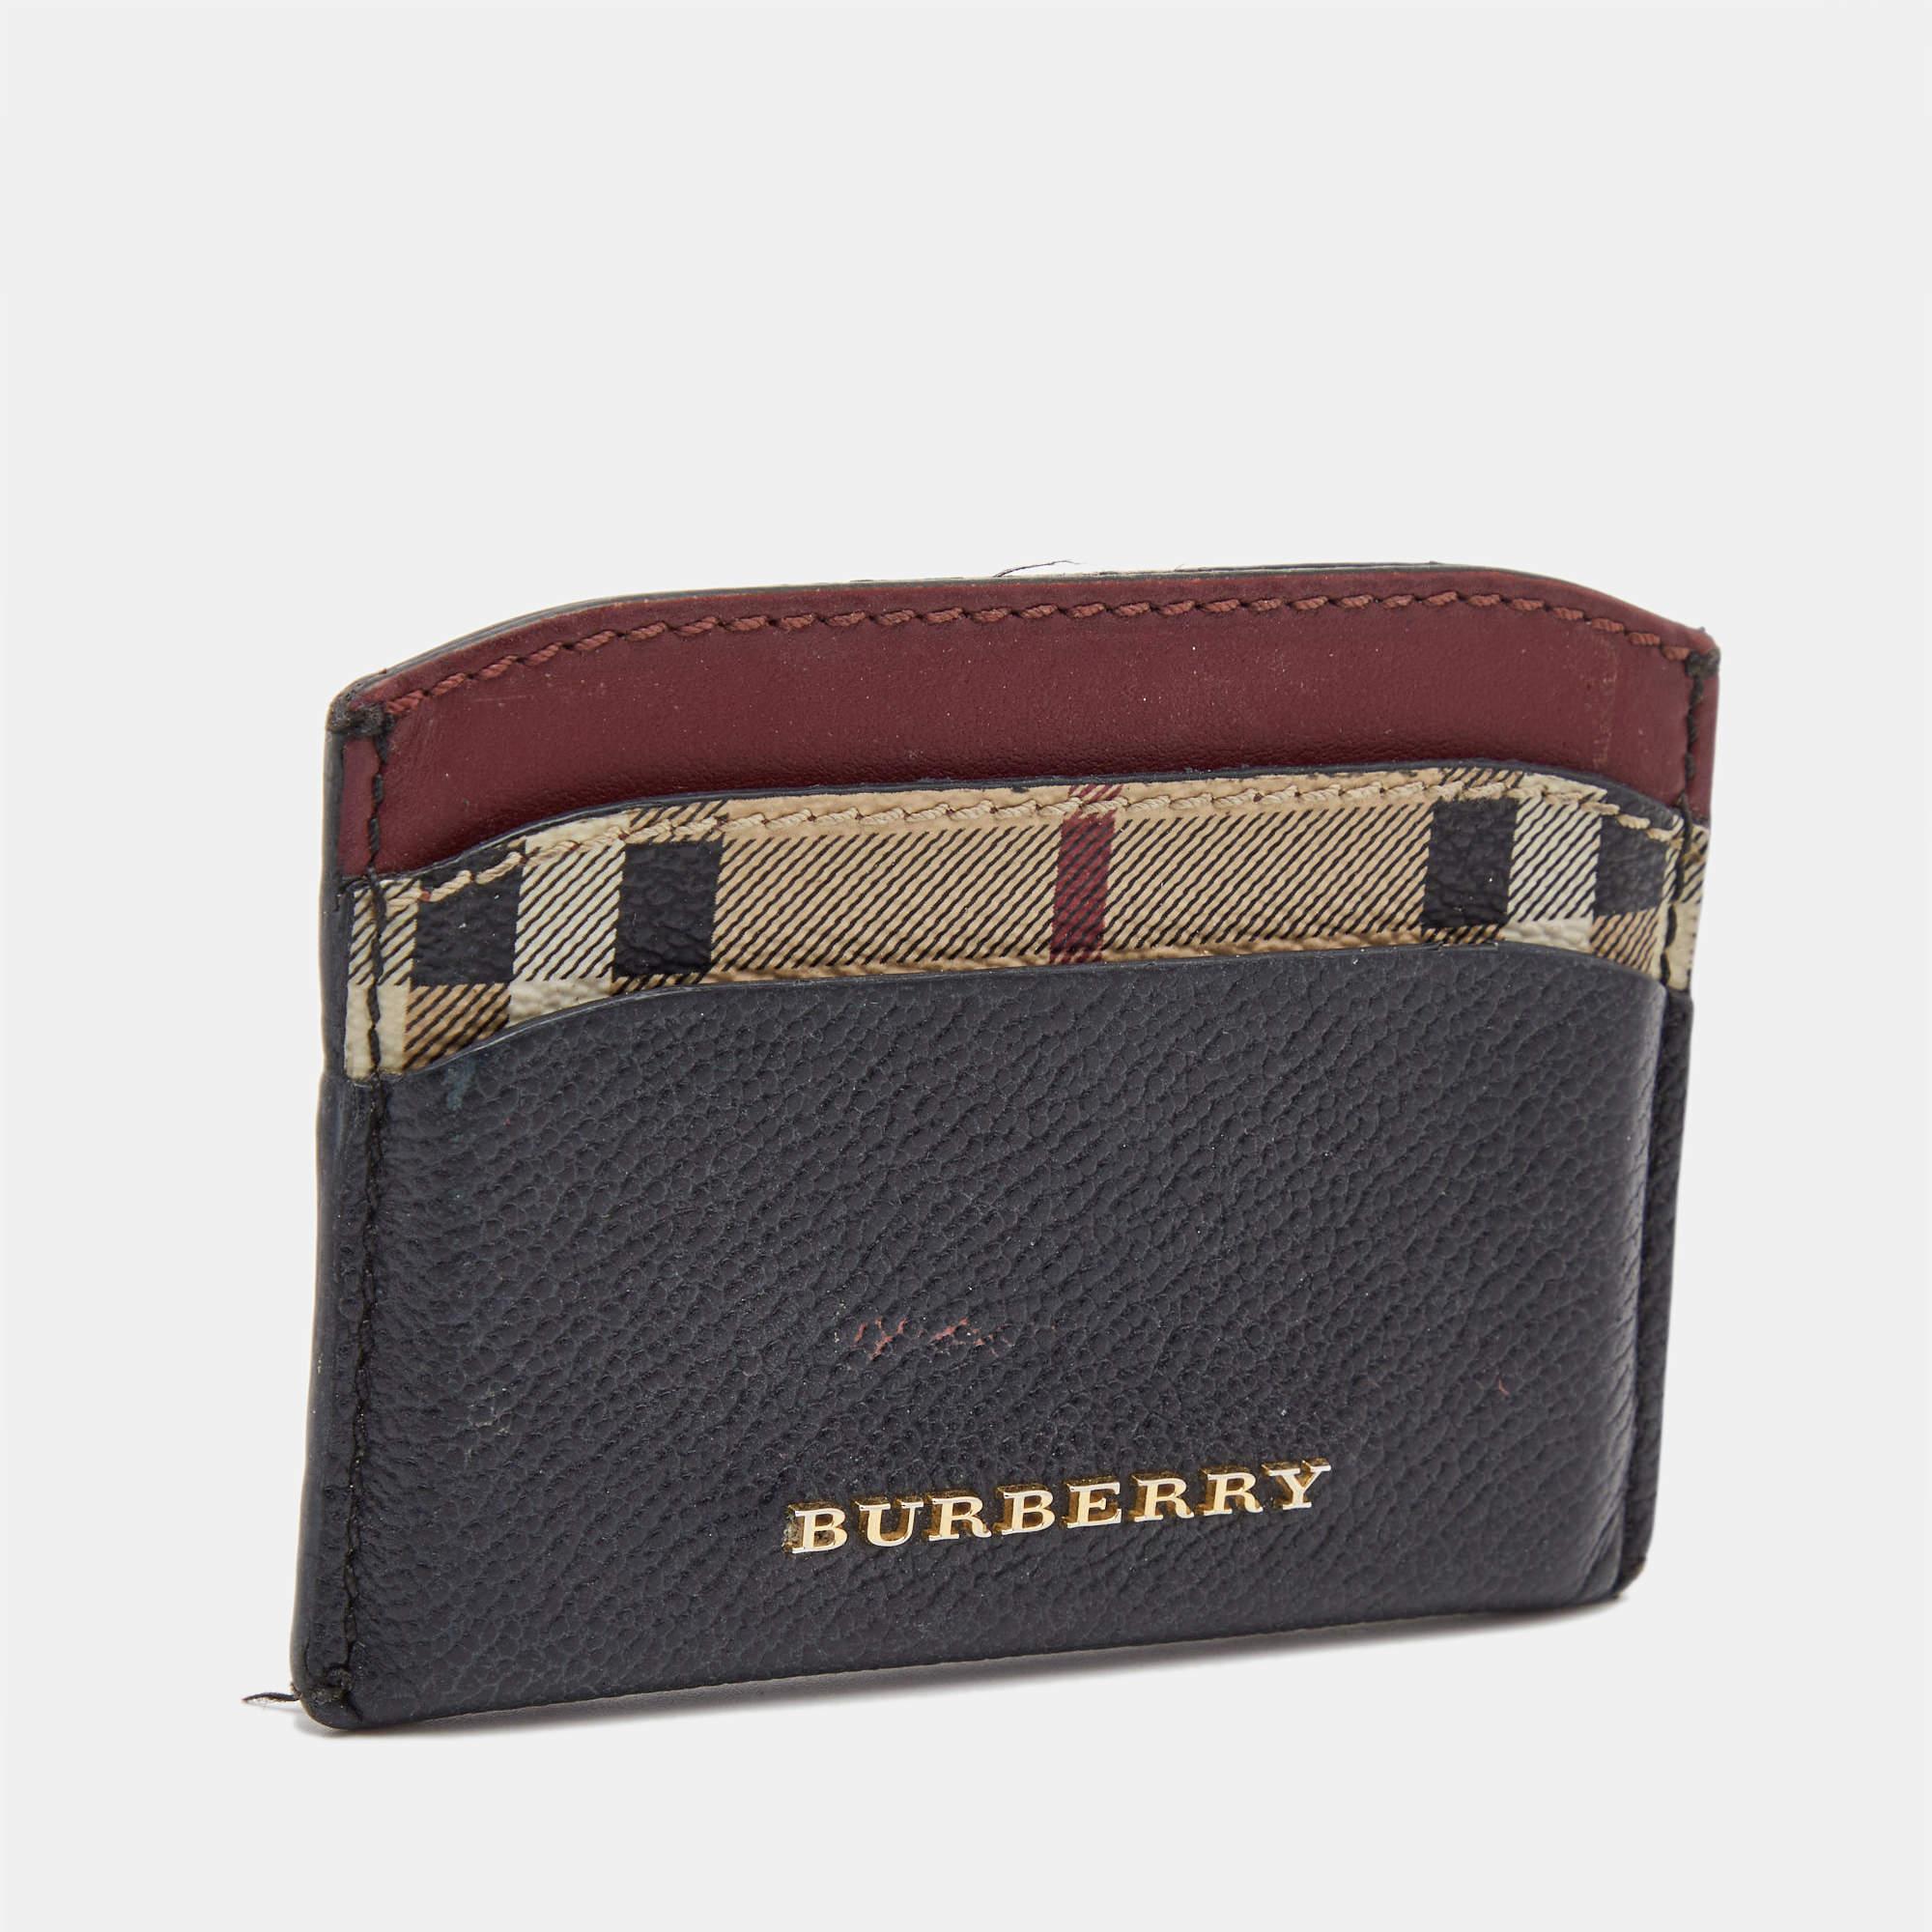 Designed by Burberry, this card case made from leather and check canvas is the perfect accessory to keep your cards in proper order, as it features multiple slots. It has the brand name on the front.

